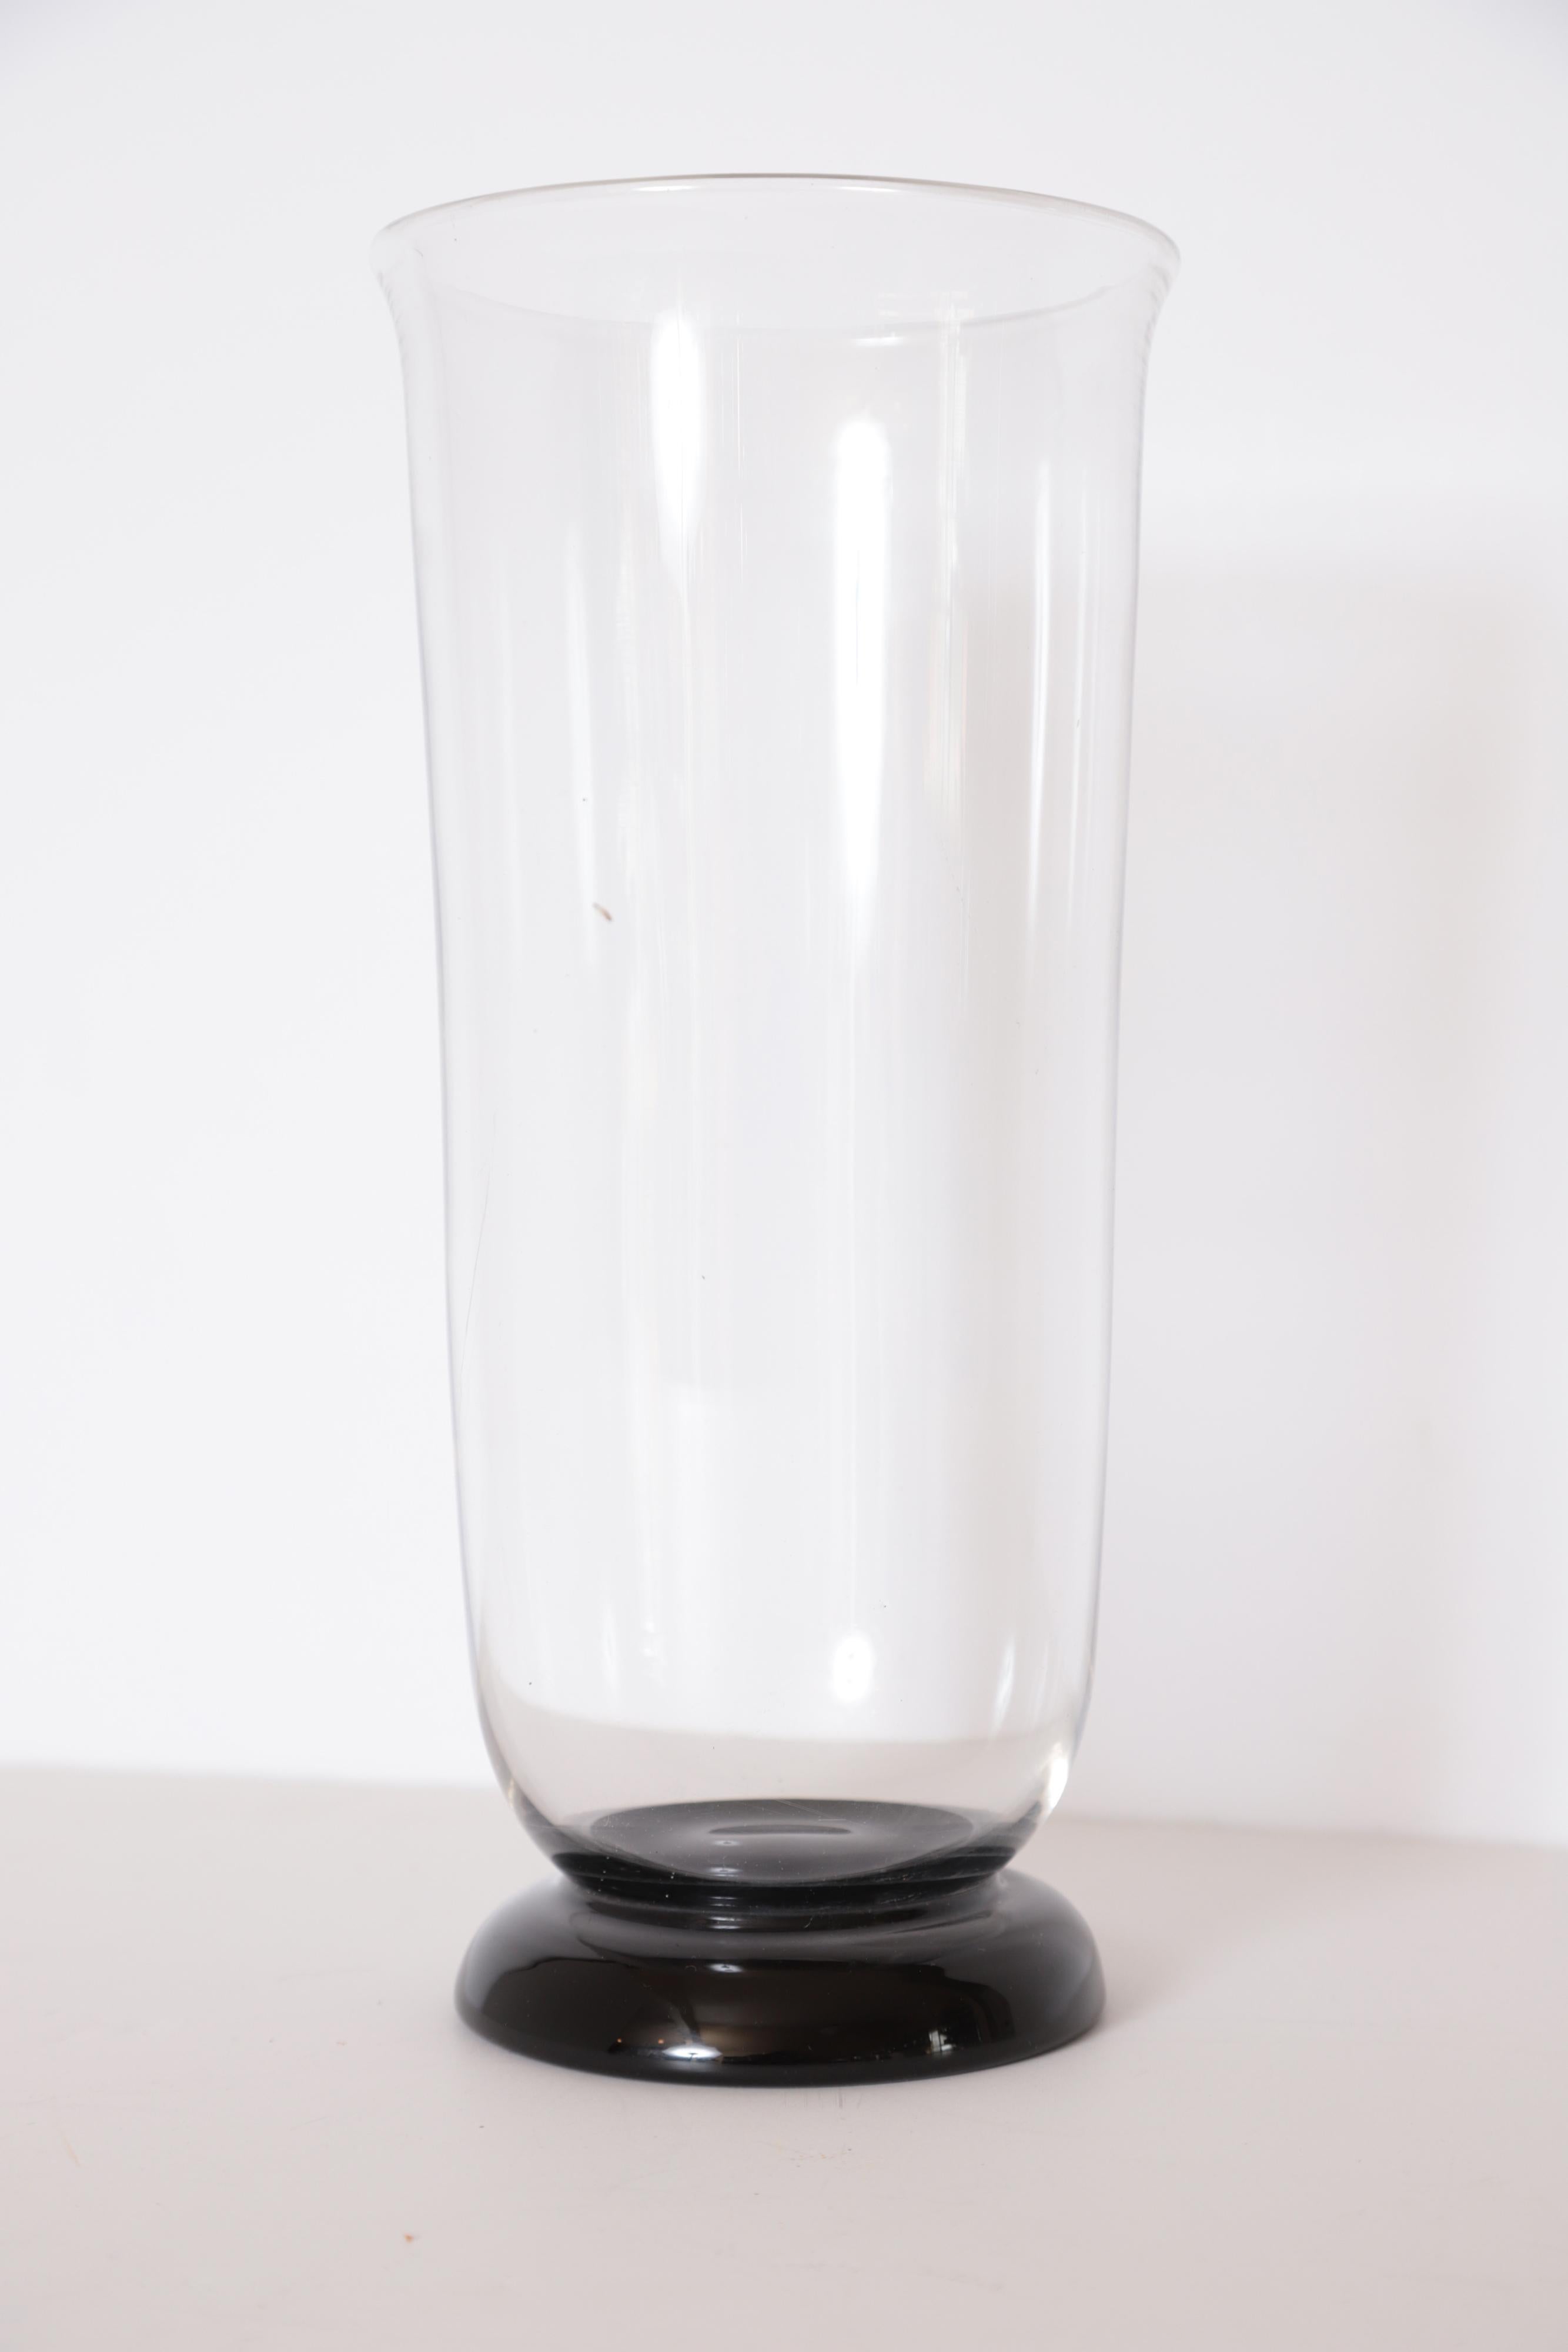 British Art Deco Keith Murray Glass Vase for Stevens & Williams / Royal Brierley For Sale